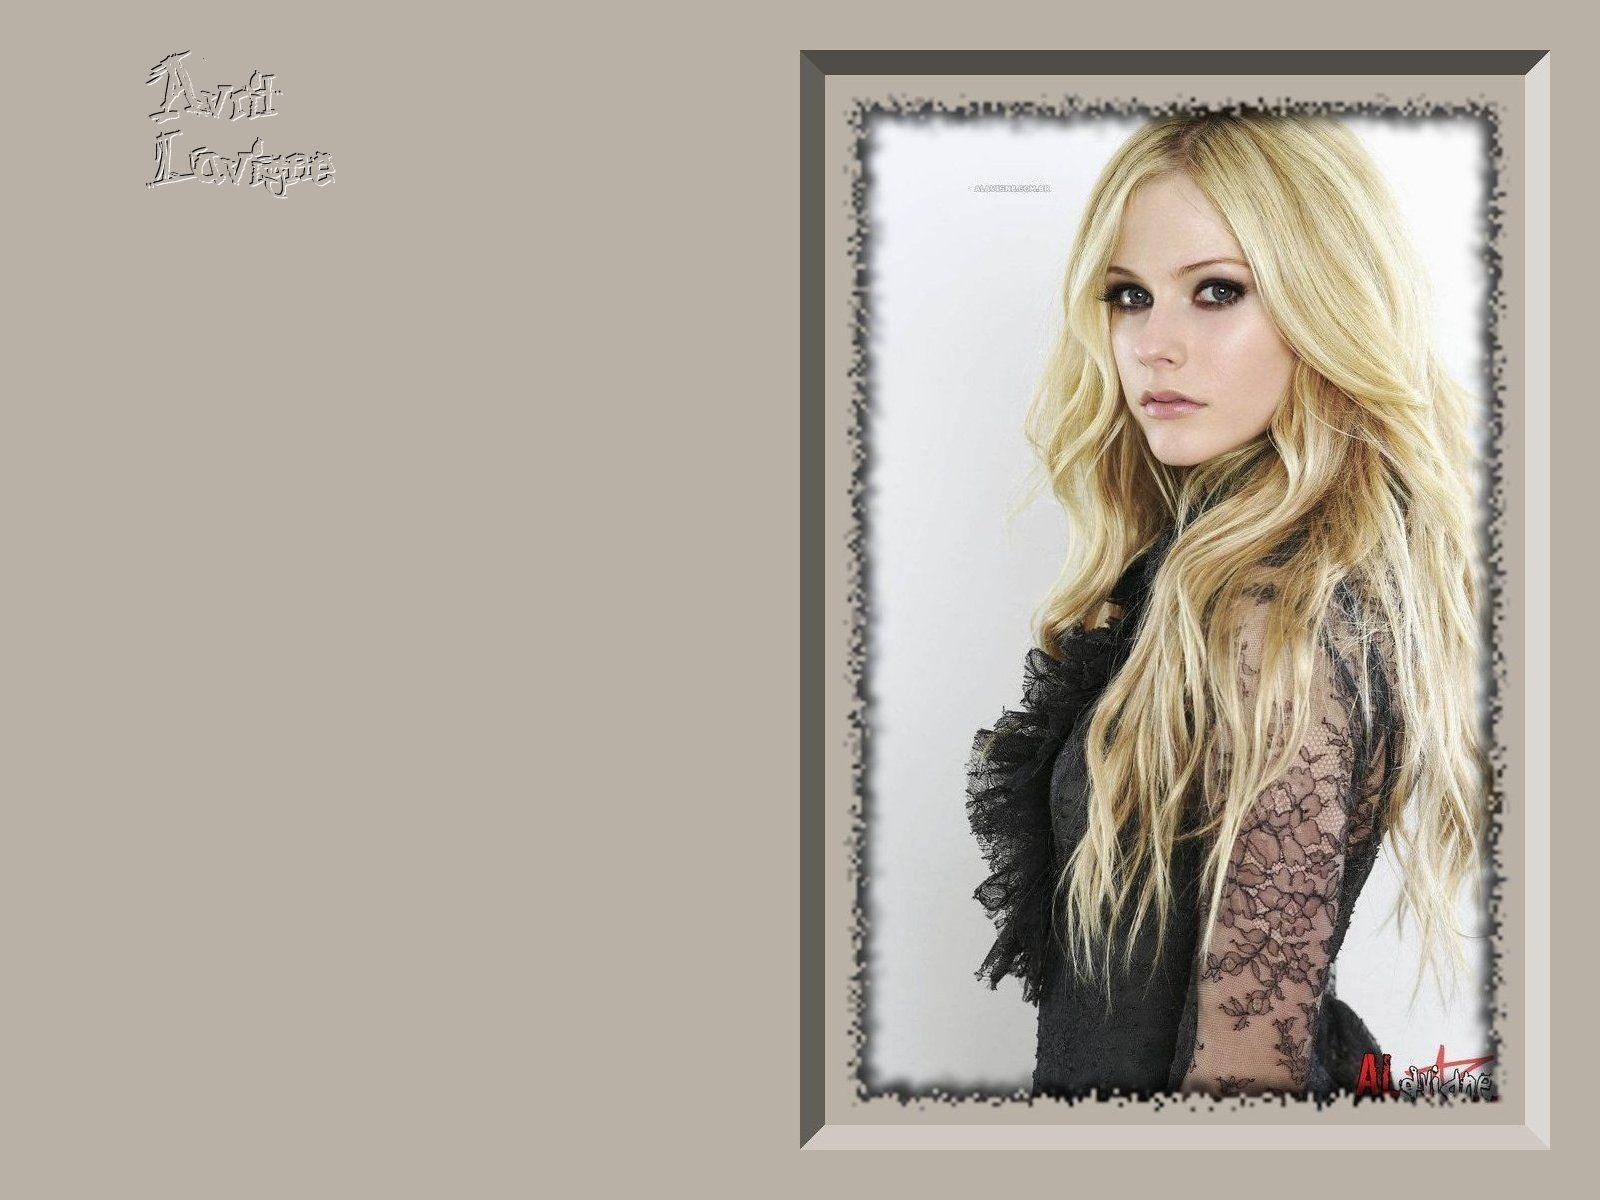 Avril Lavigne #066 - 1600x1200 Wallpapers Pictures Photos Images